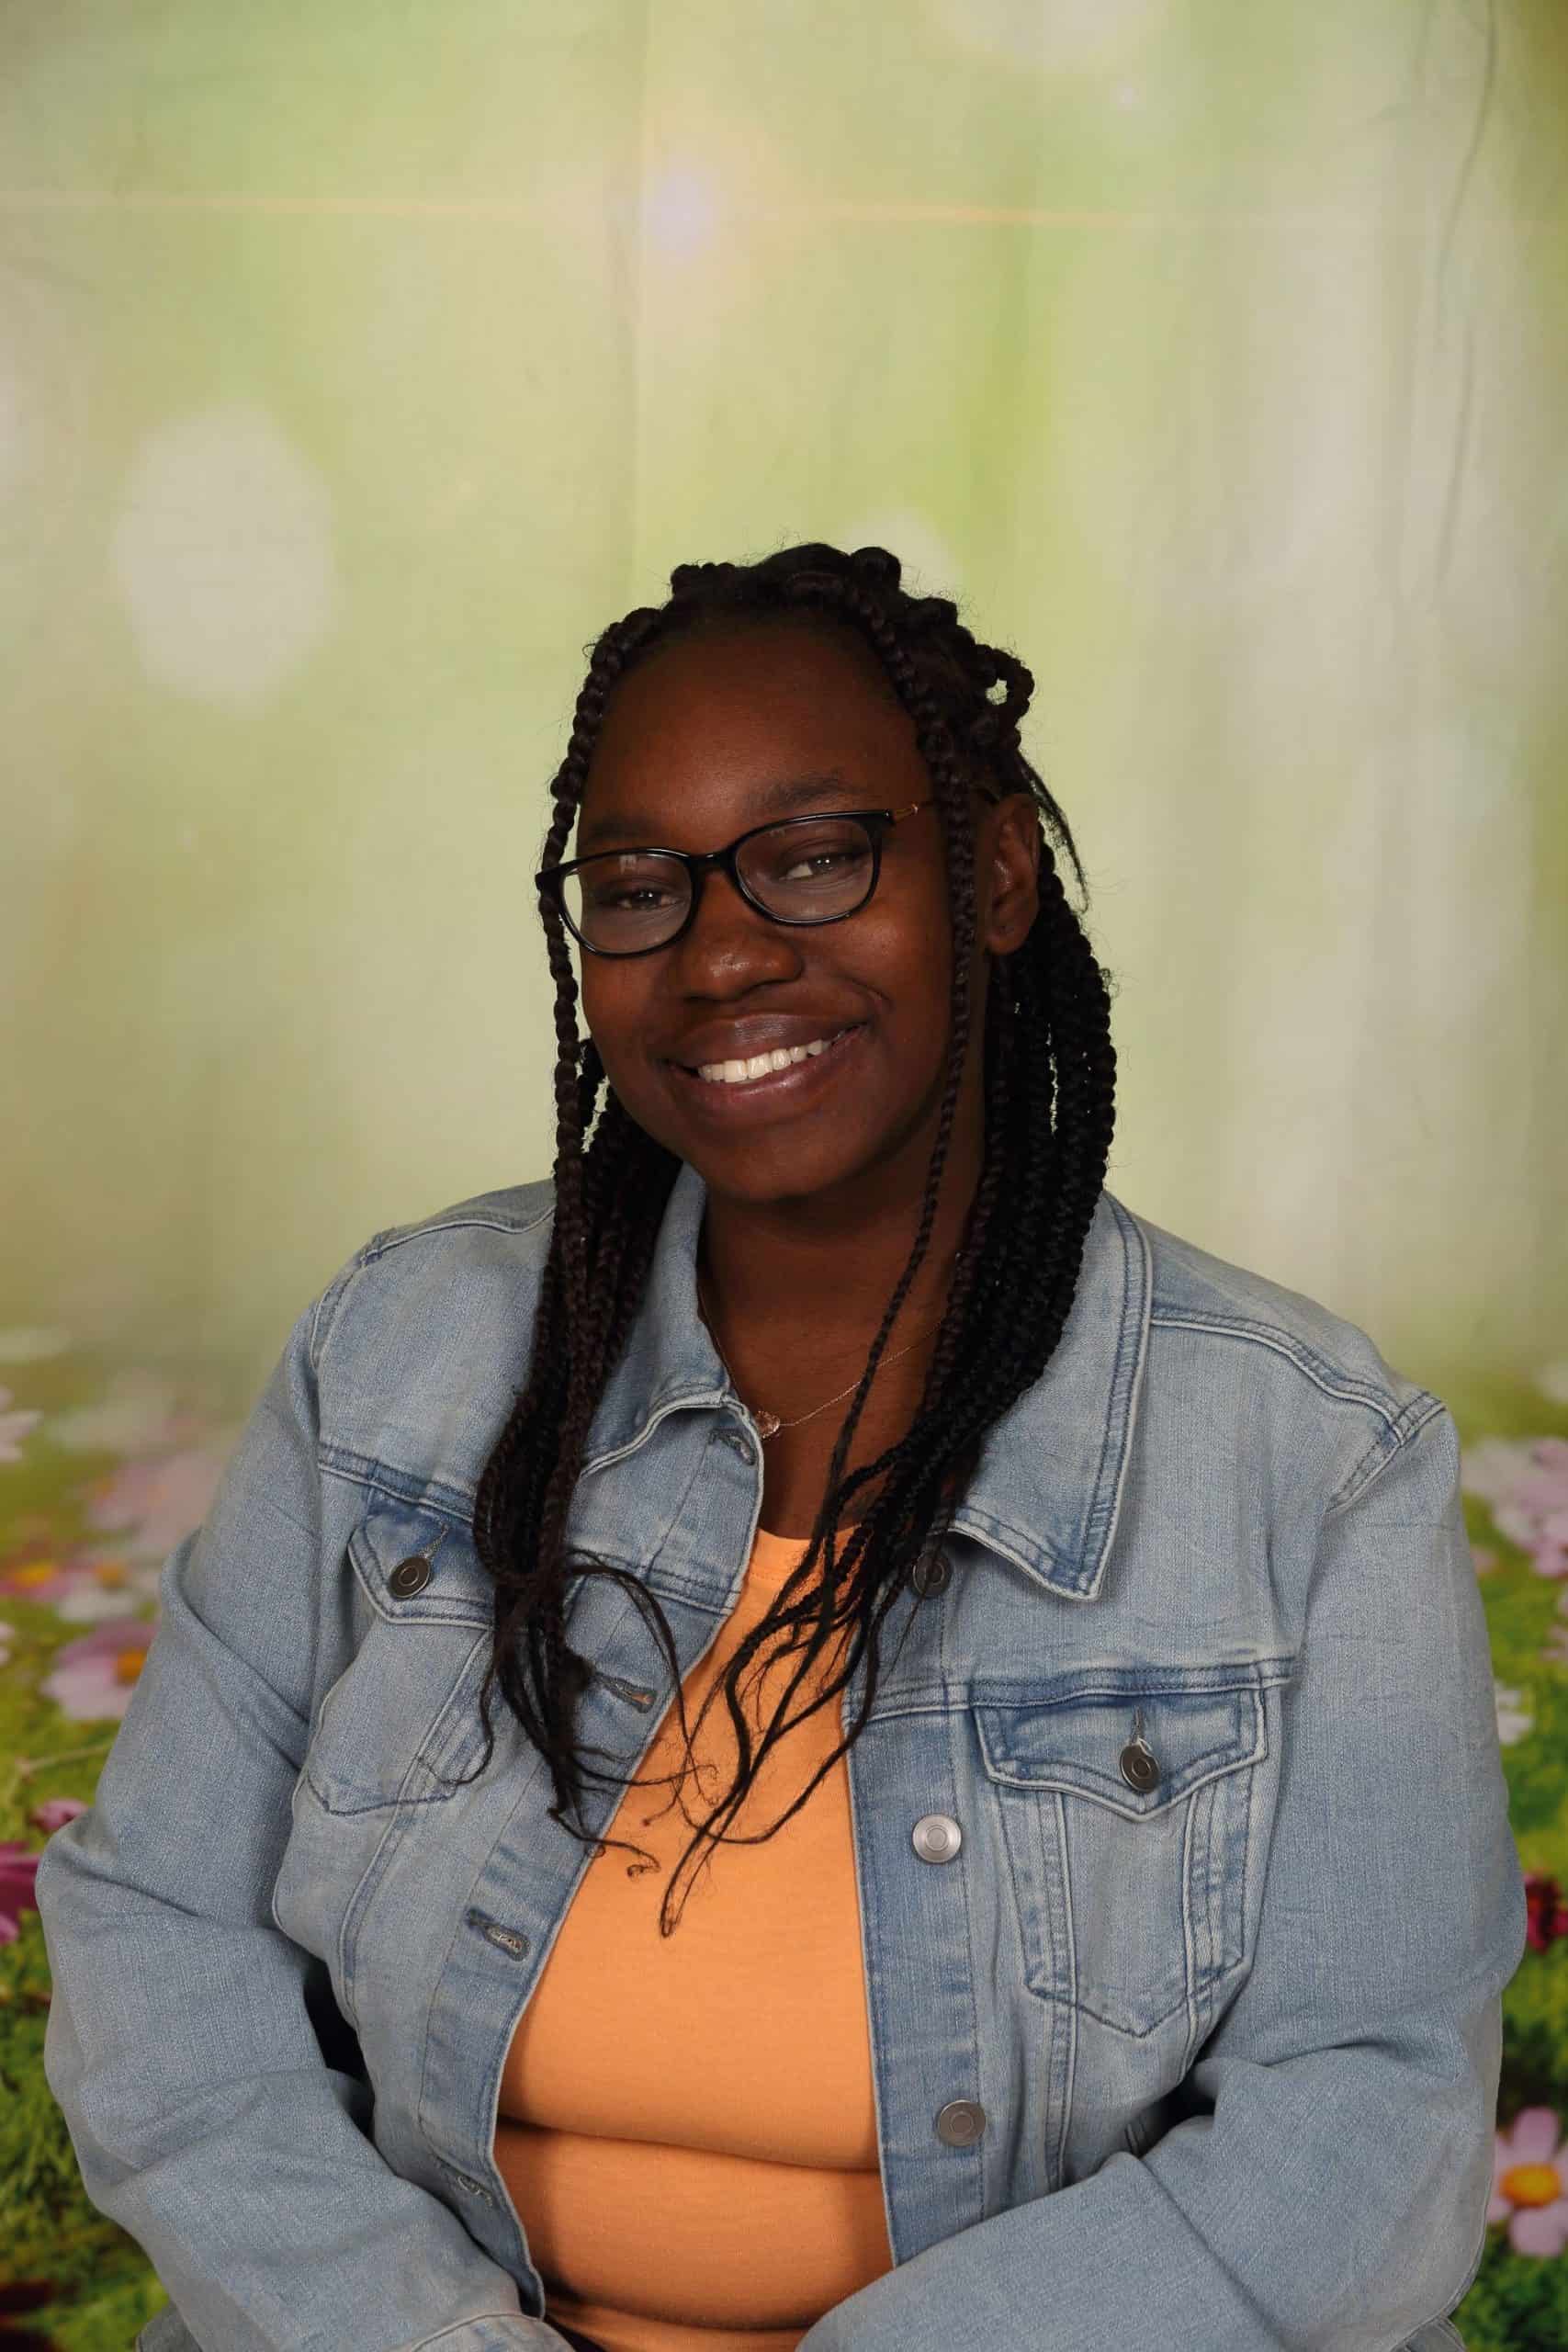 Photo of Co-Teacher Audreyanna Thompson. She is a a young African-American woman with long hair. She is smiling andan orange shirt and denim jacket.